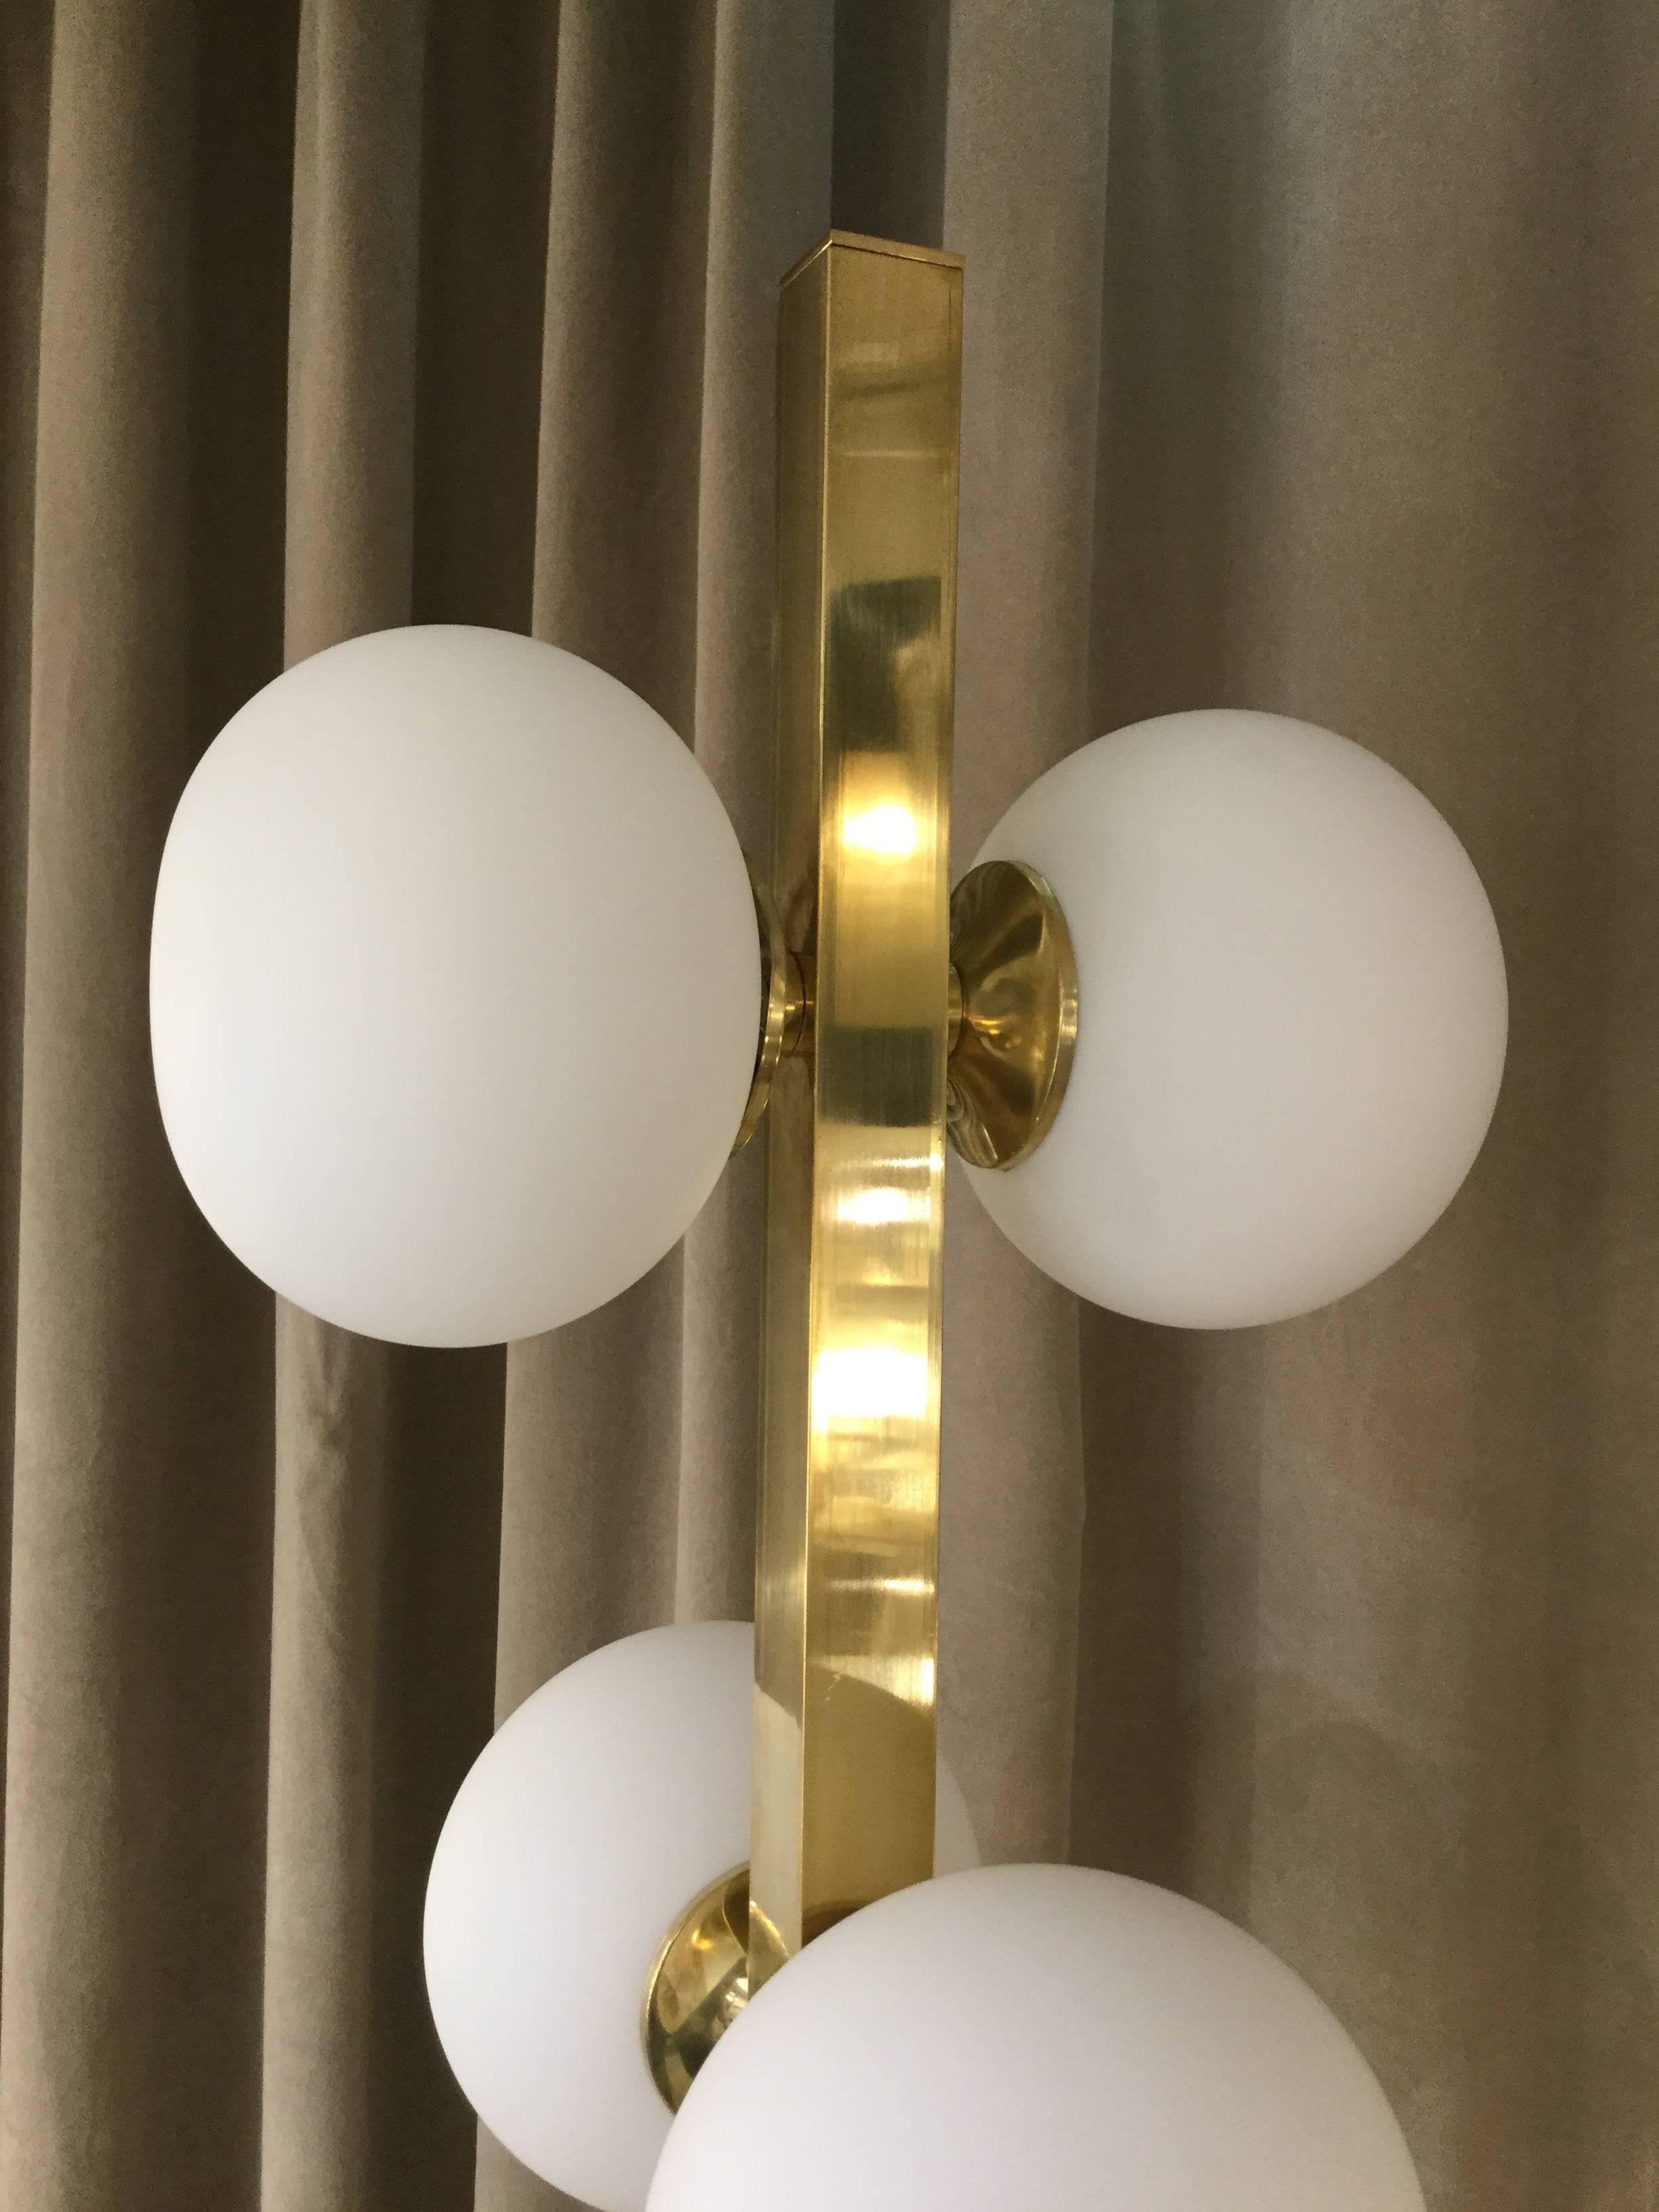 An Italian designed modernist floor lamp with ten spherical glass shade on brass structure In the style of Stilnovo.